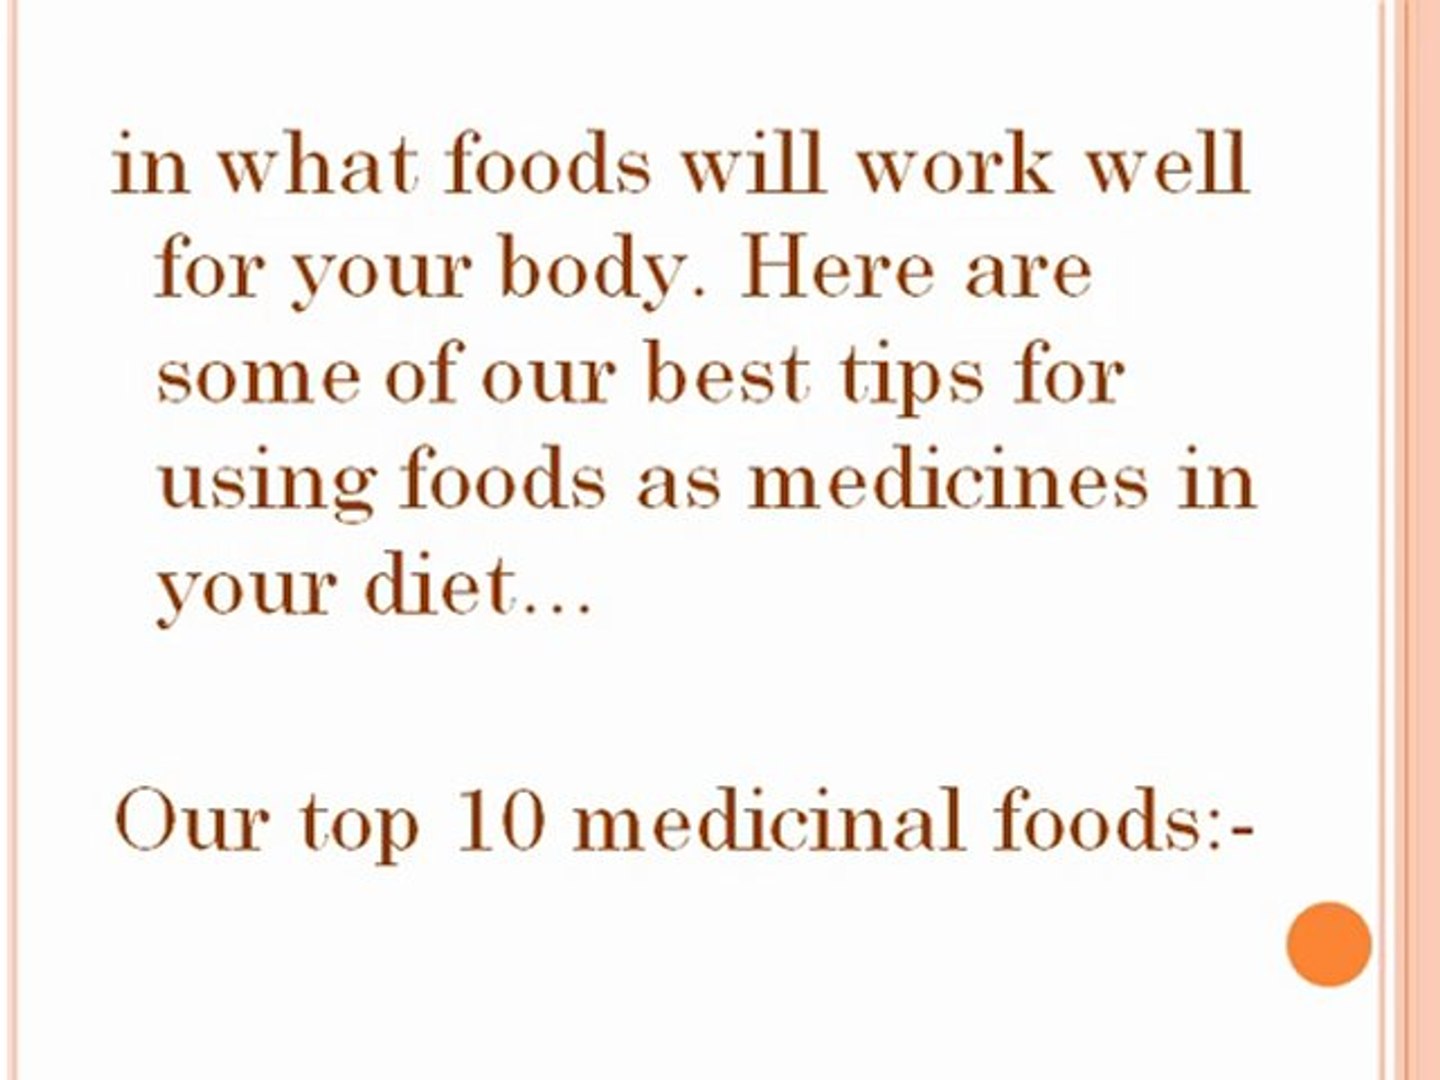 Food As Medicine – Eating For Health